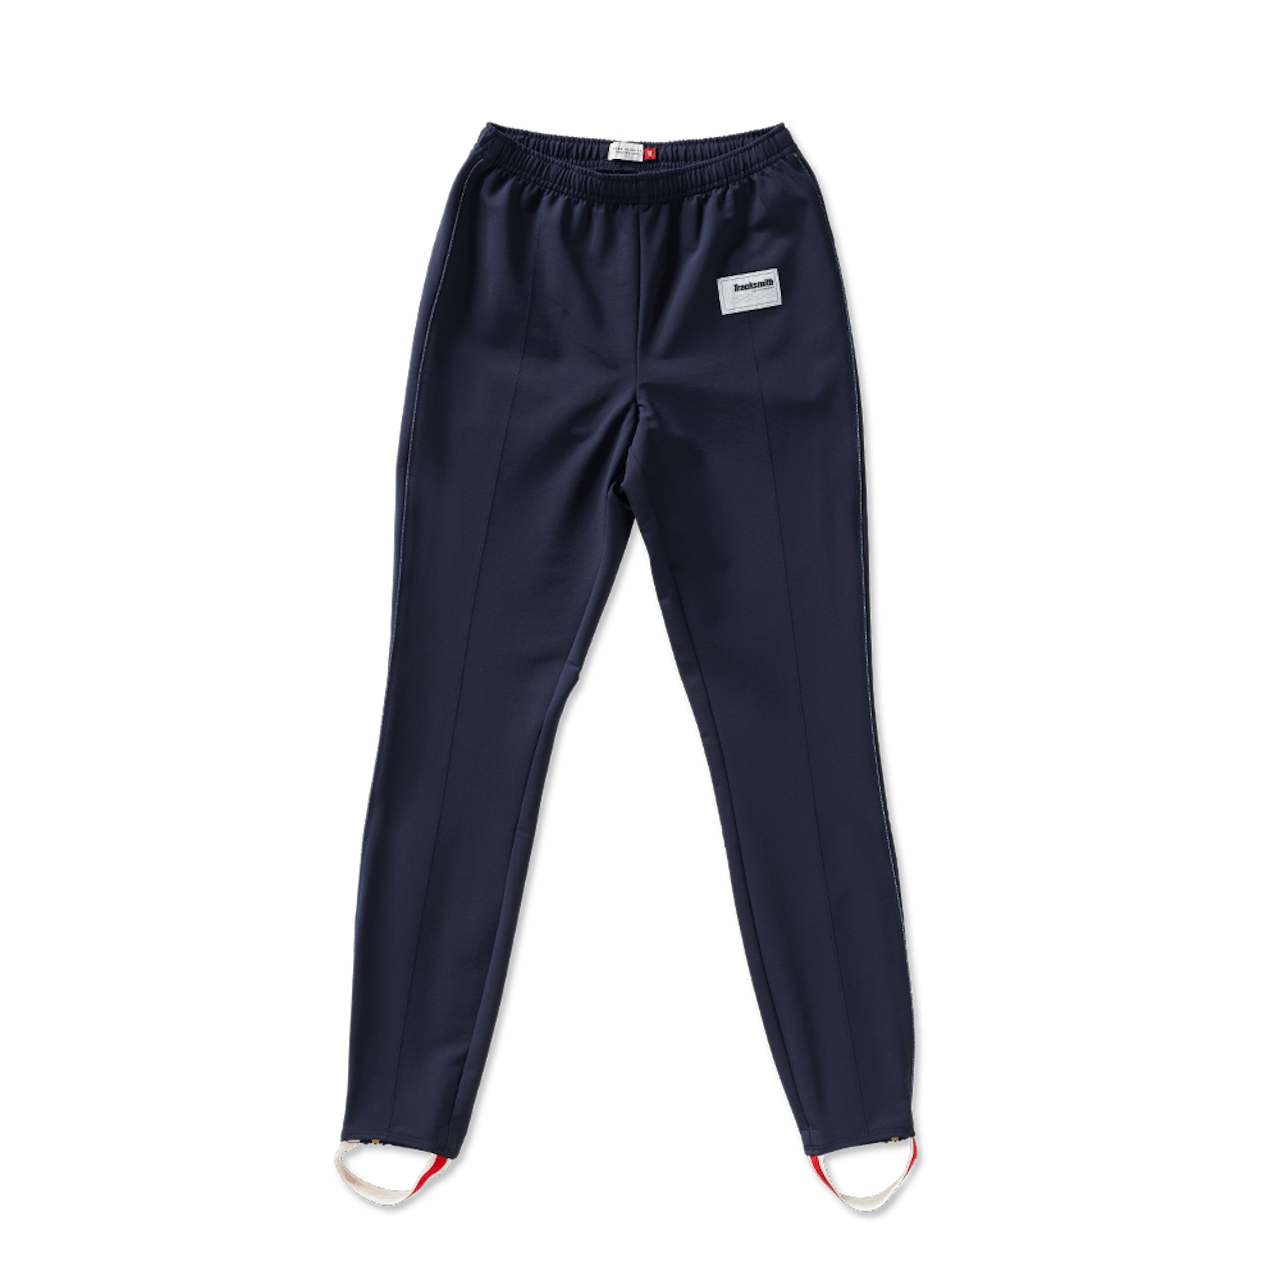 https://tracksmith-media.imgix.net/Fall19-Womens-Bislett-Pants-Navy.png?auto=format,compress&crop=faces&dpr=2&fit=crop&h=640&w=640